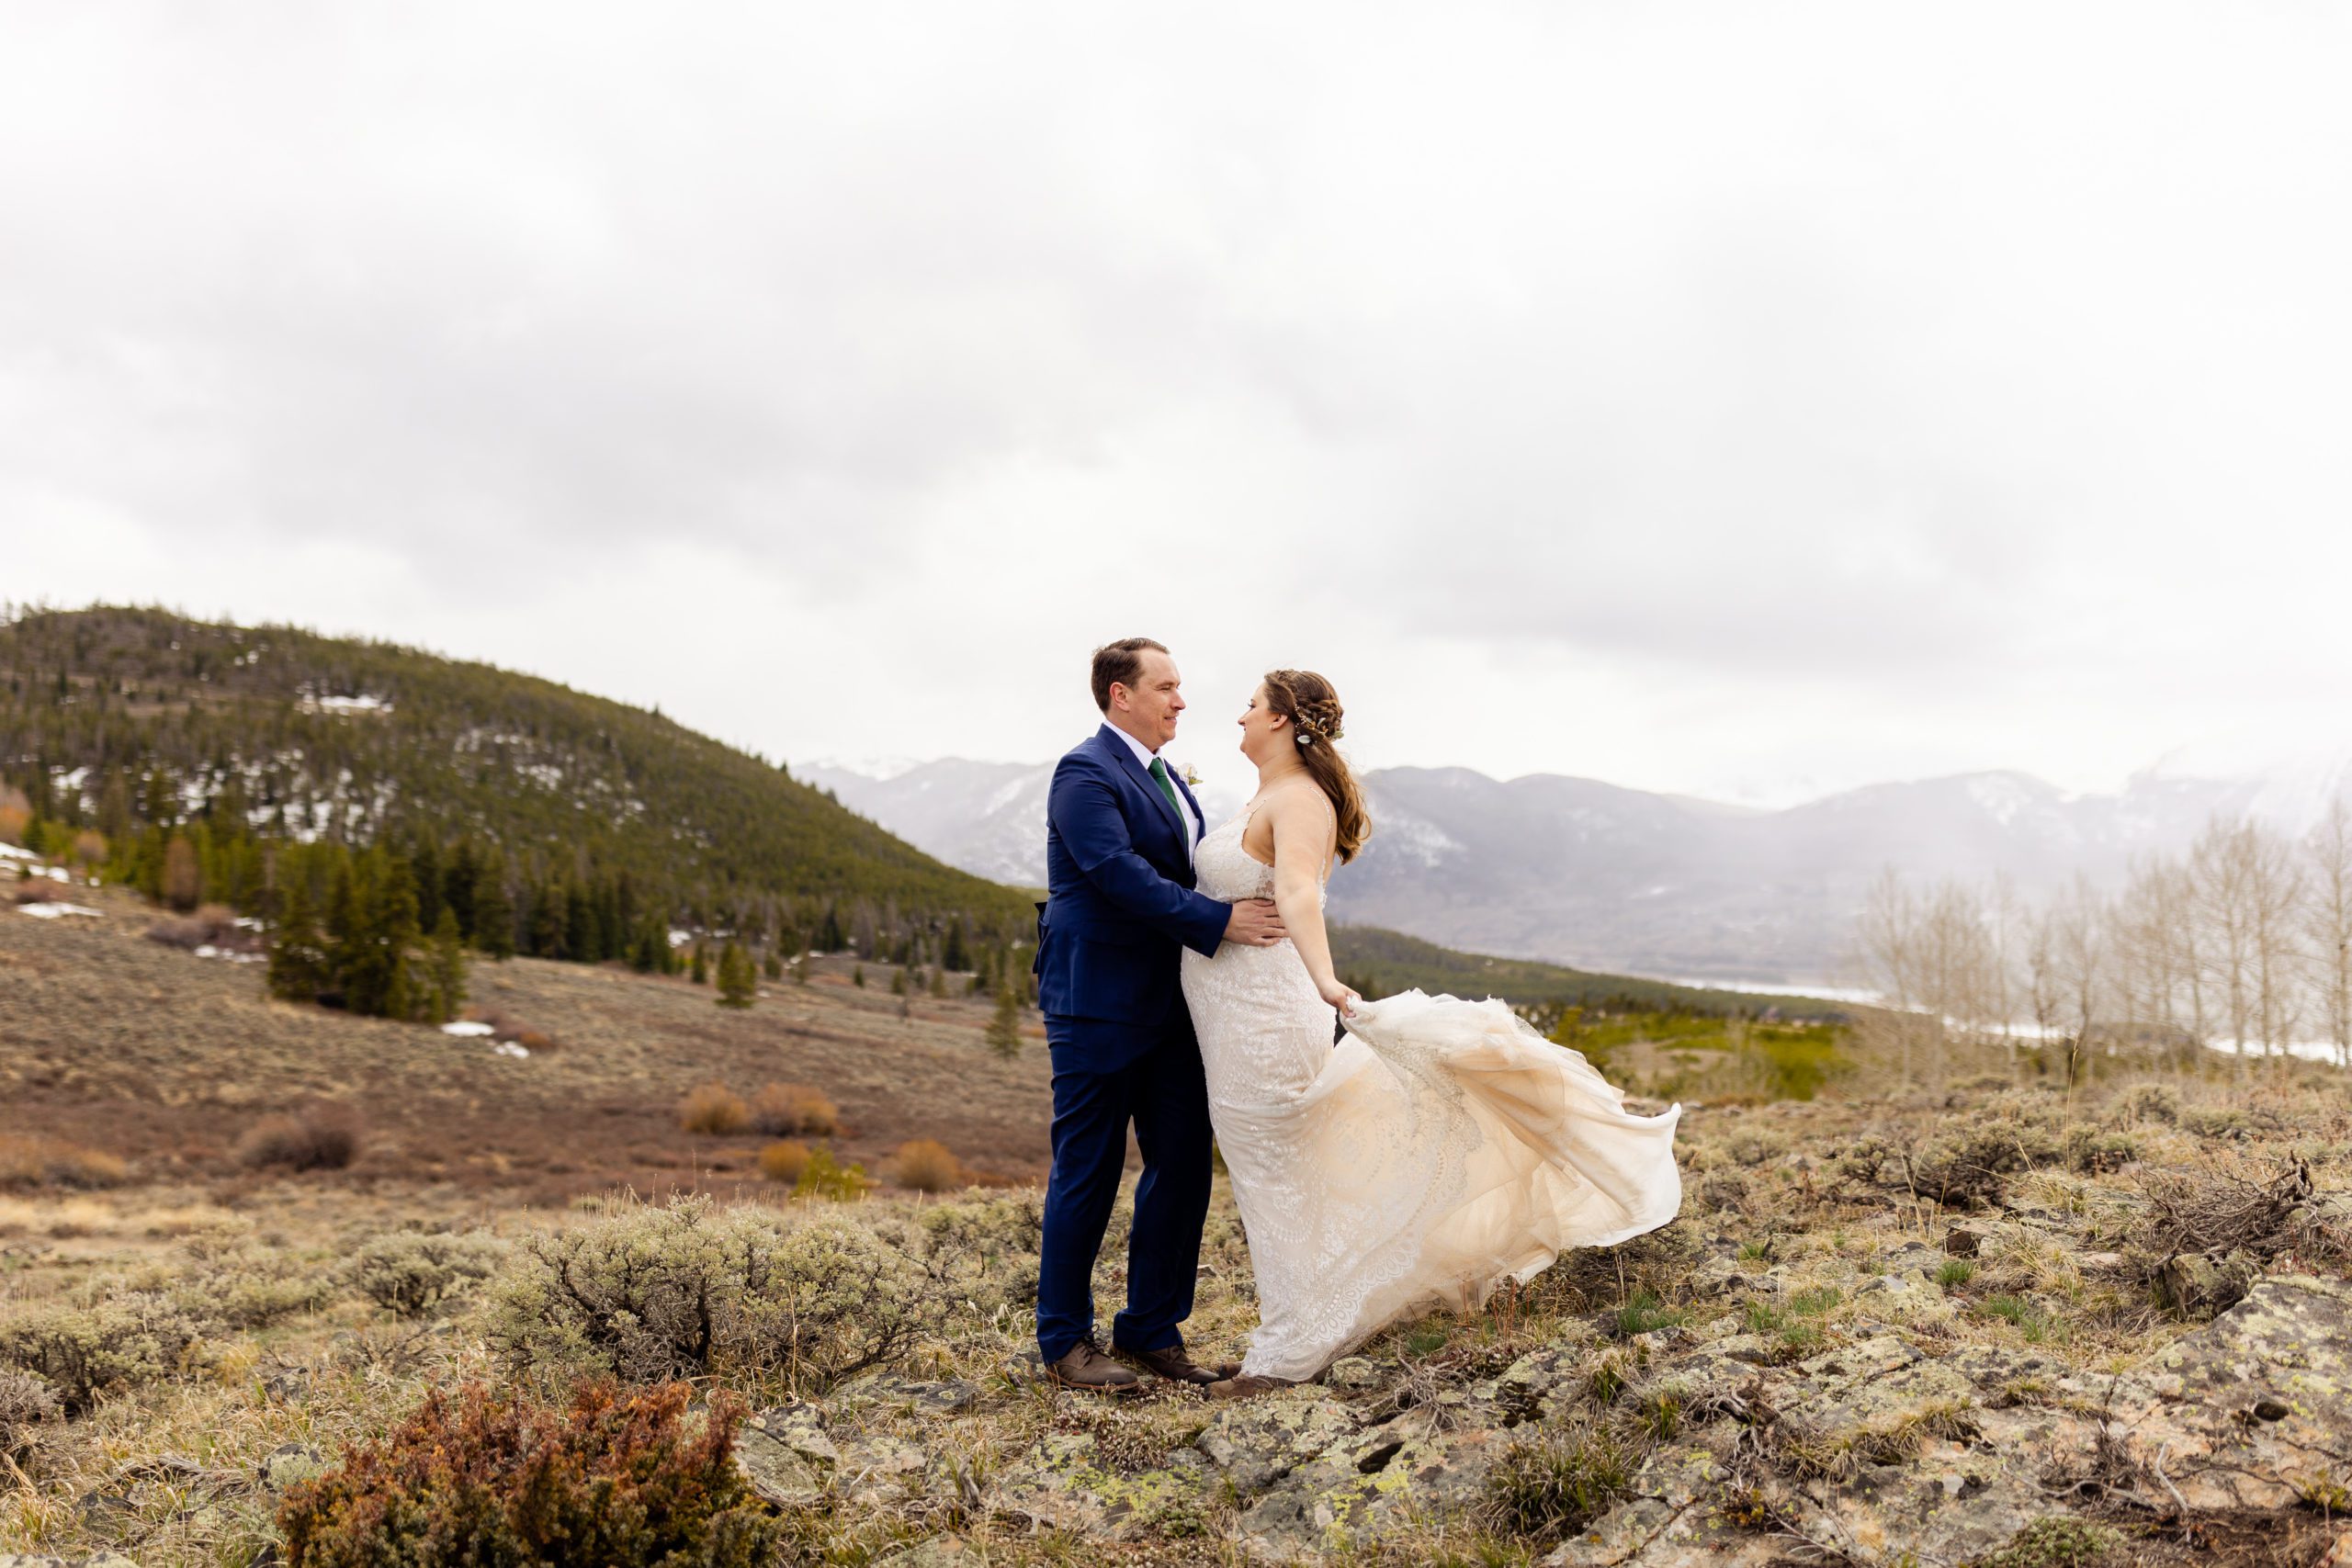 The bride and groom take their couples portraits at Loveland Pass before their Sapphire Point Elopement.